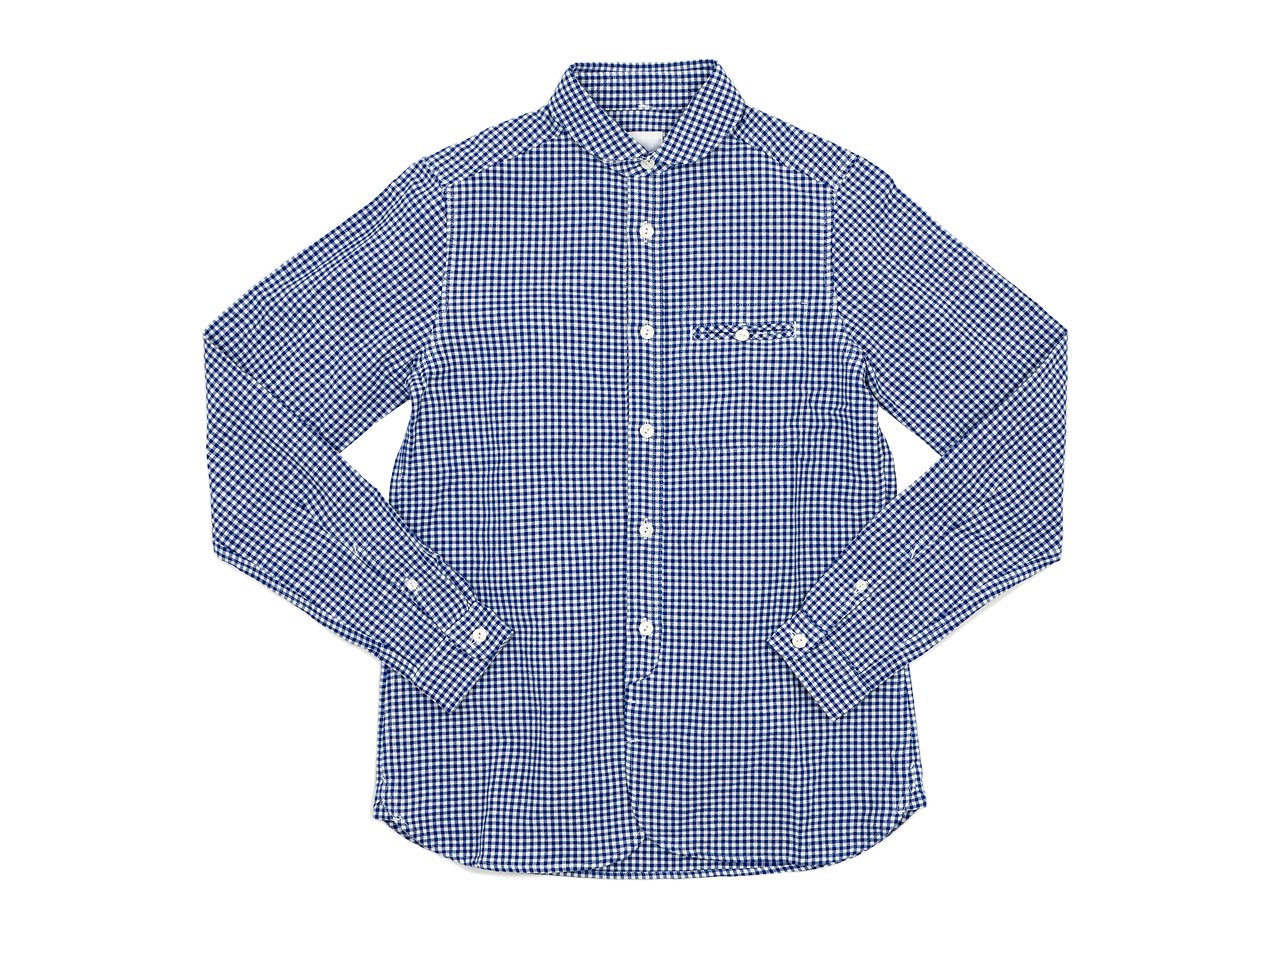 maillot sunset gingham round work shirts BLUE x WHITE maillot通販